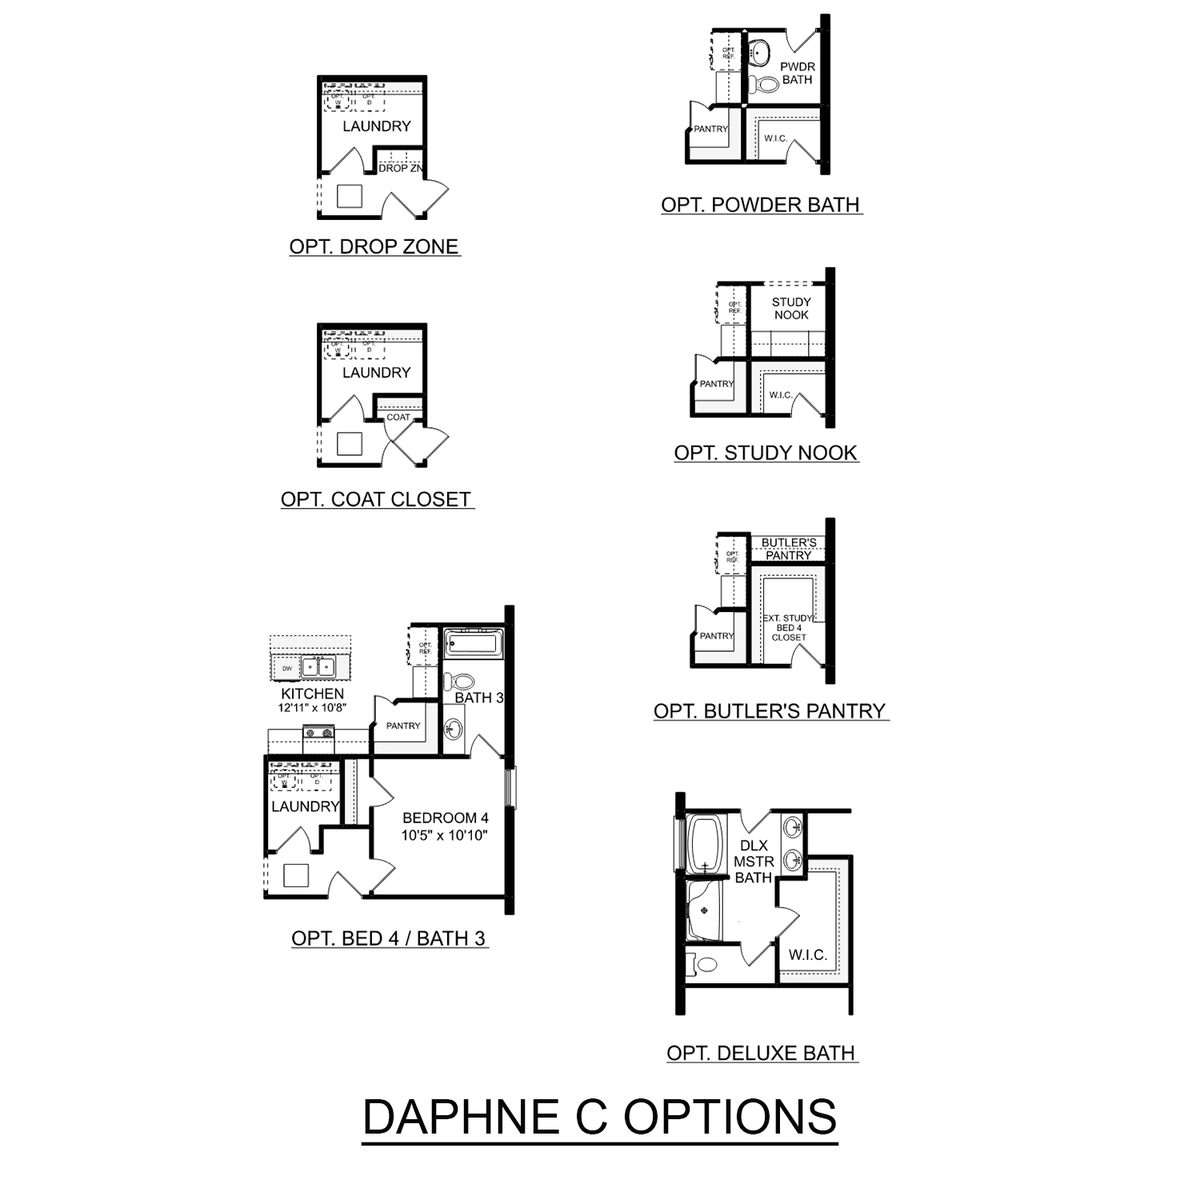 2 - The Daphne C buildable floor plan layout in Davidson Homes' Wood Trail community.